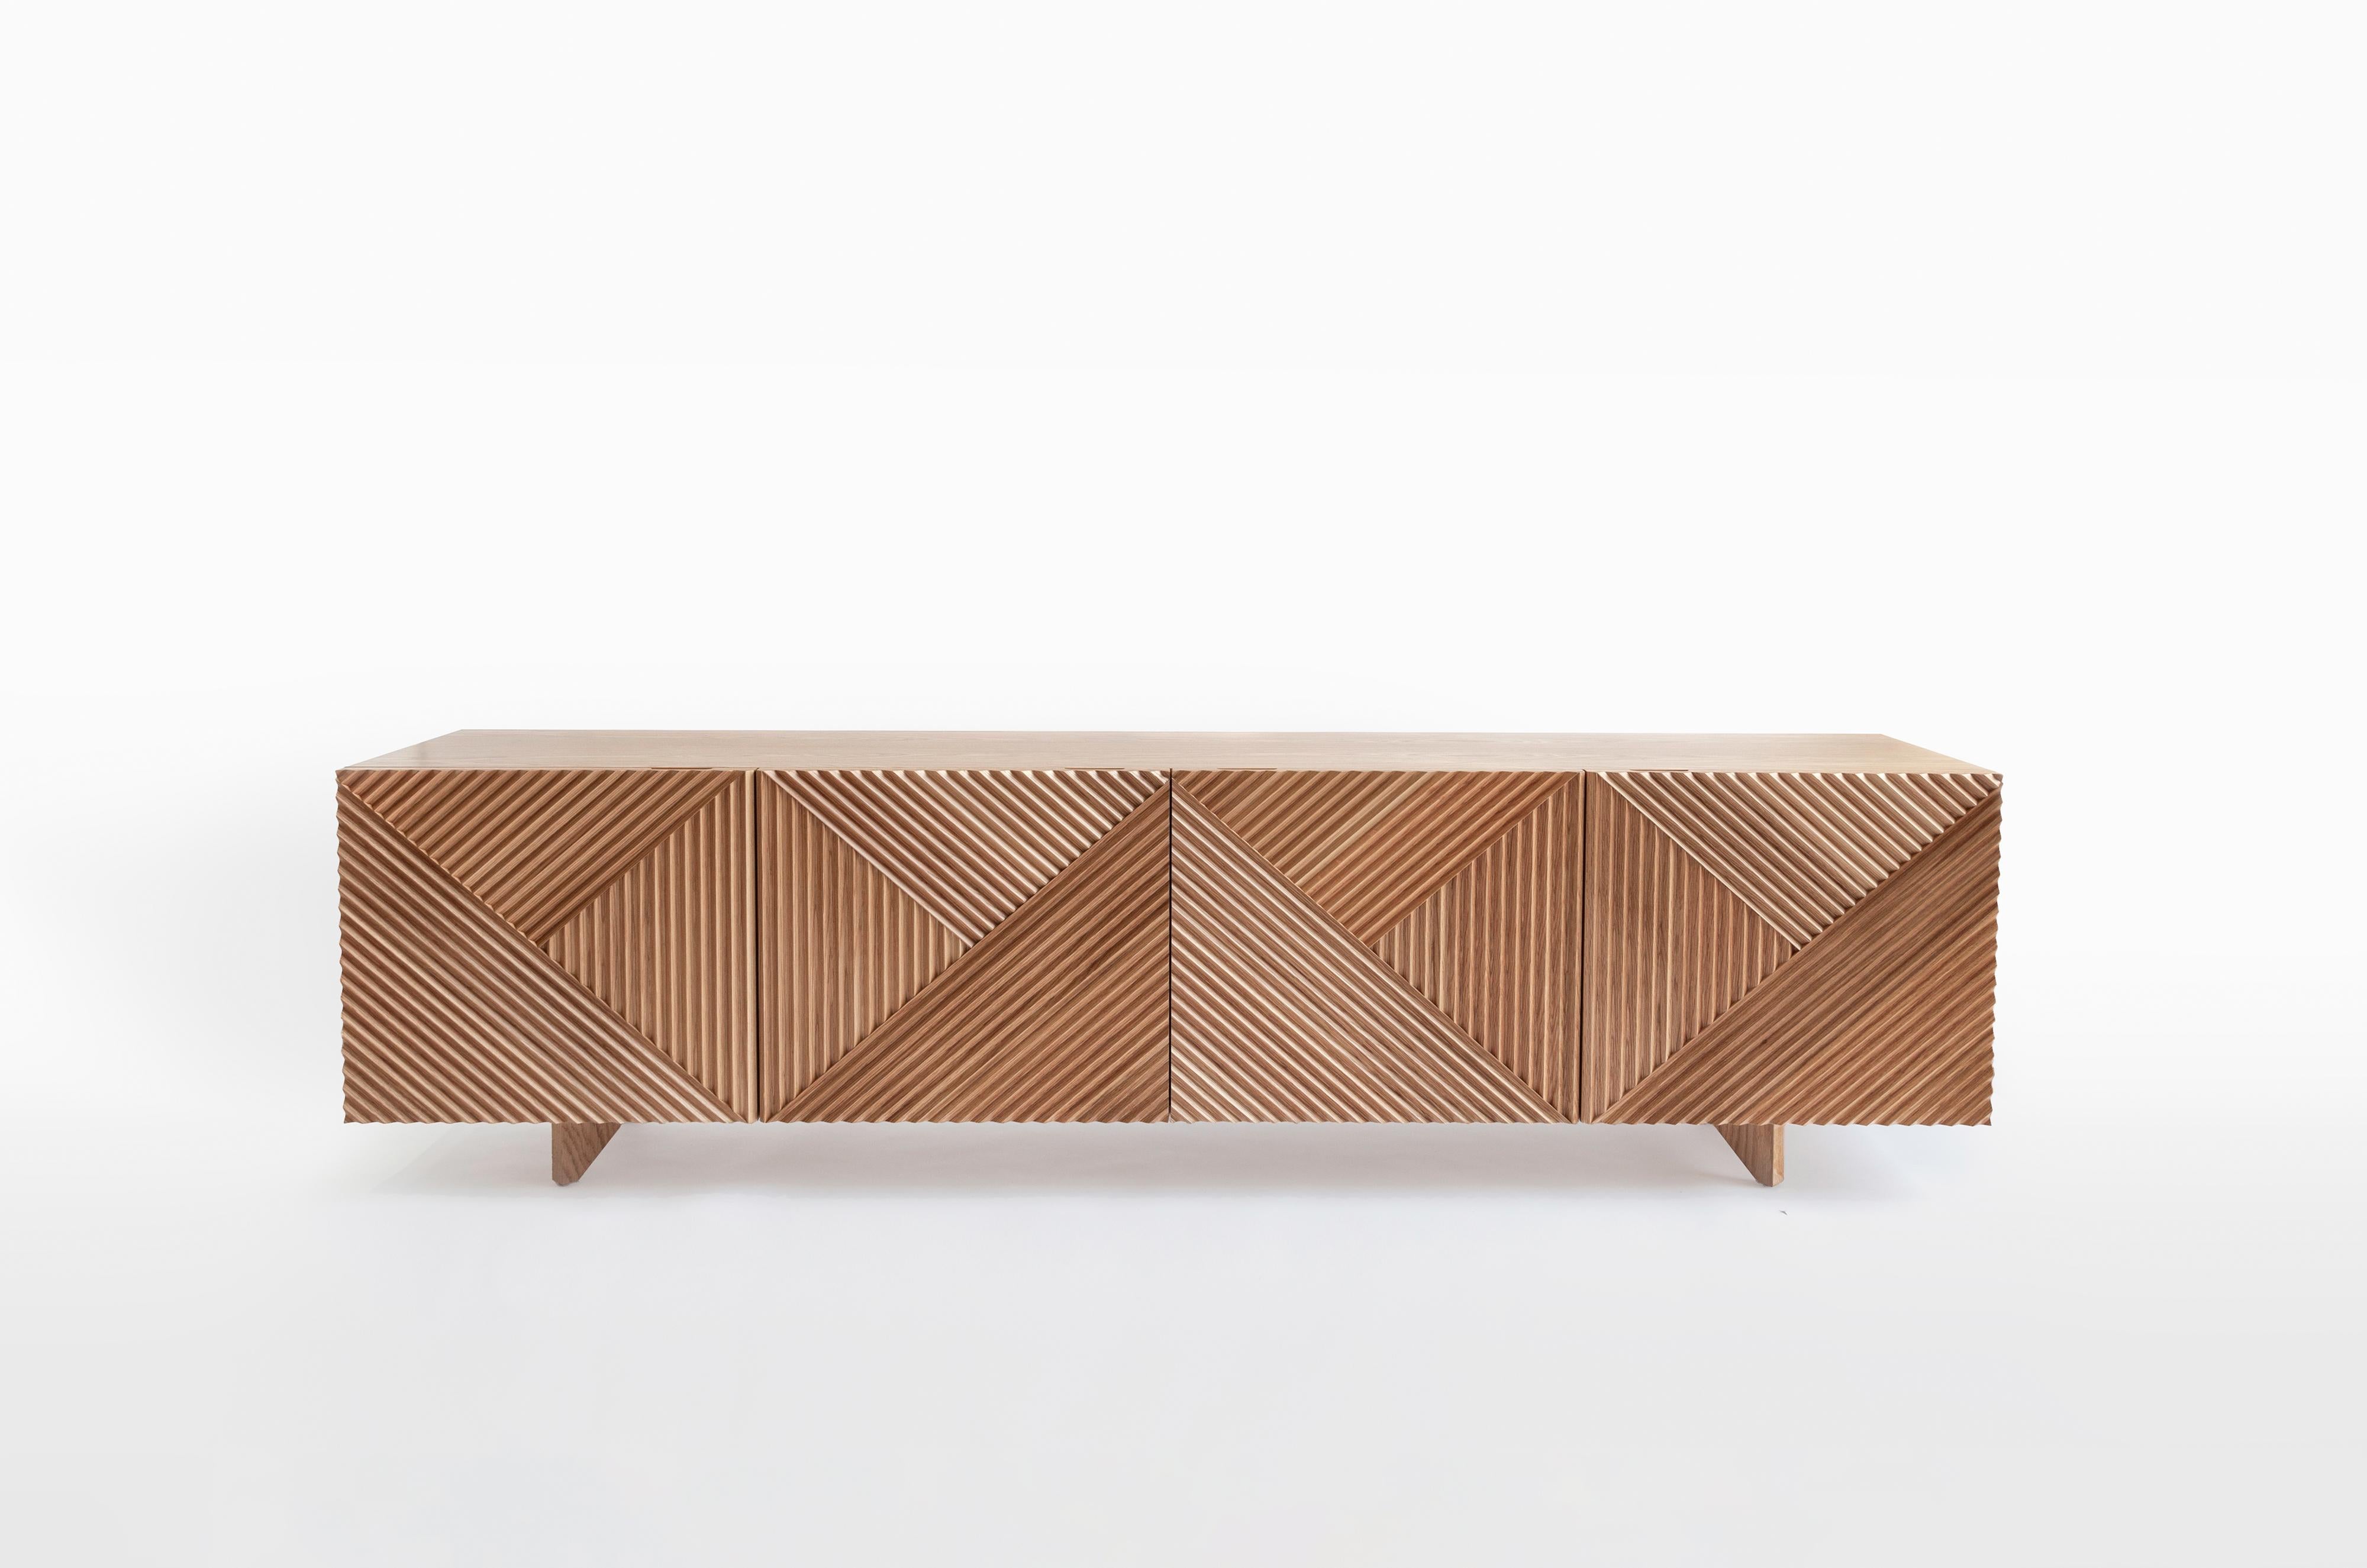 Oak Enzo sideboard by Rosanna Ceravolo
Dimensions: W 220 x D 46 x H 68 cm
Materials: Solid american oak fronts, polyurethane spray finish.
Also available in different dimensions and materials.


Rosanna Ceravolo is a Melbourne based architect